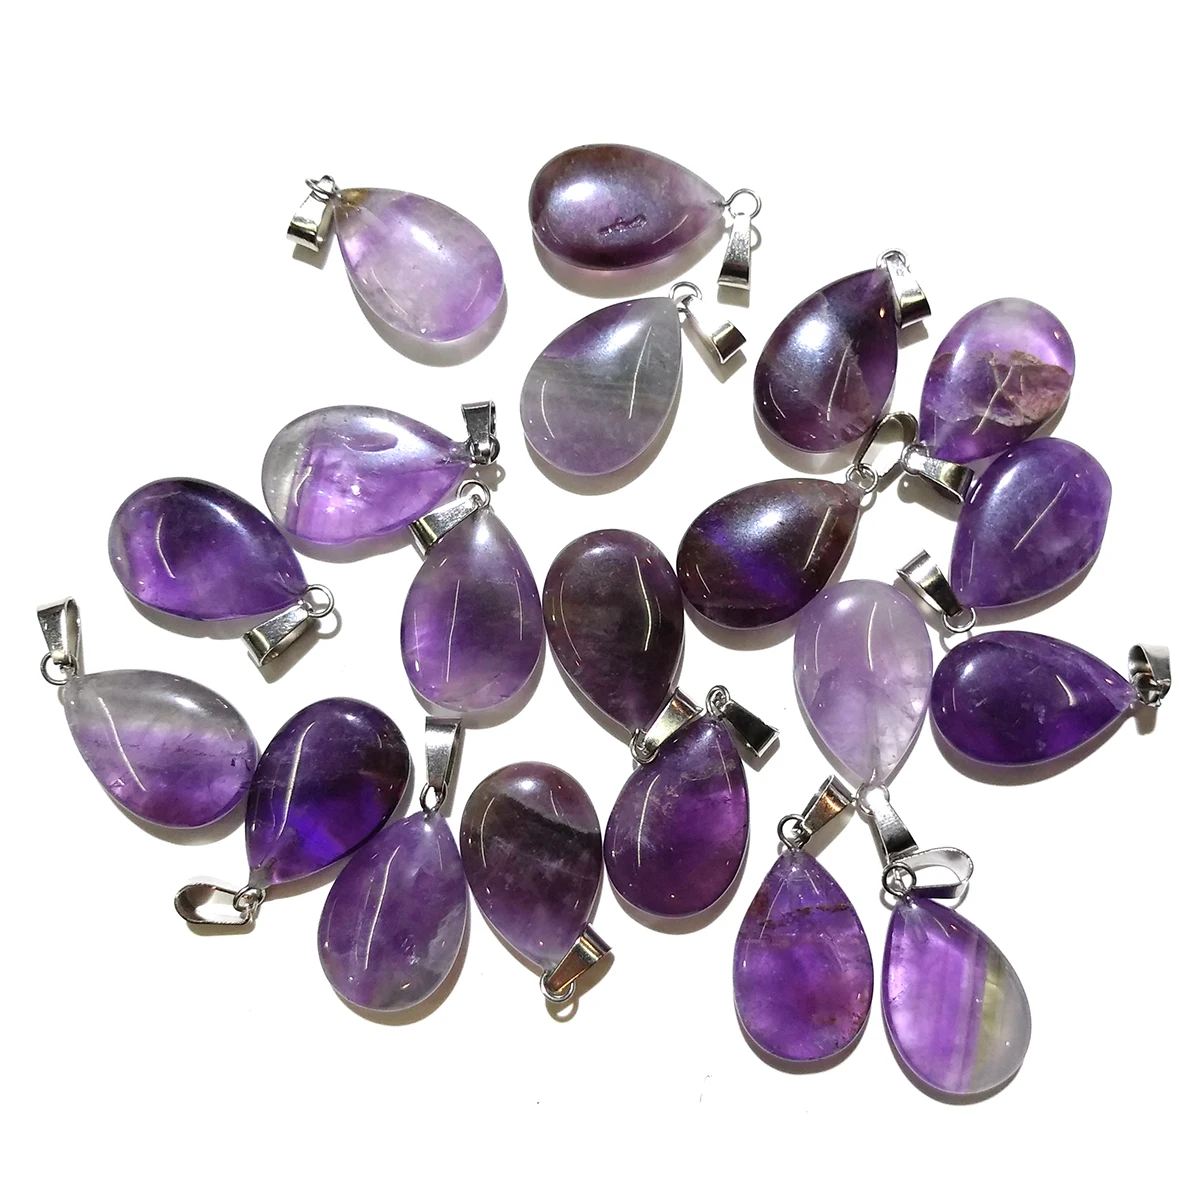 

Natural Semi-precious Stone Round Drop-shaped Amethyst Boutique Pendant Making DIY Fashion Charm Necklace Jewelry Gift